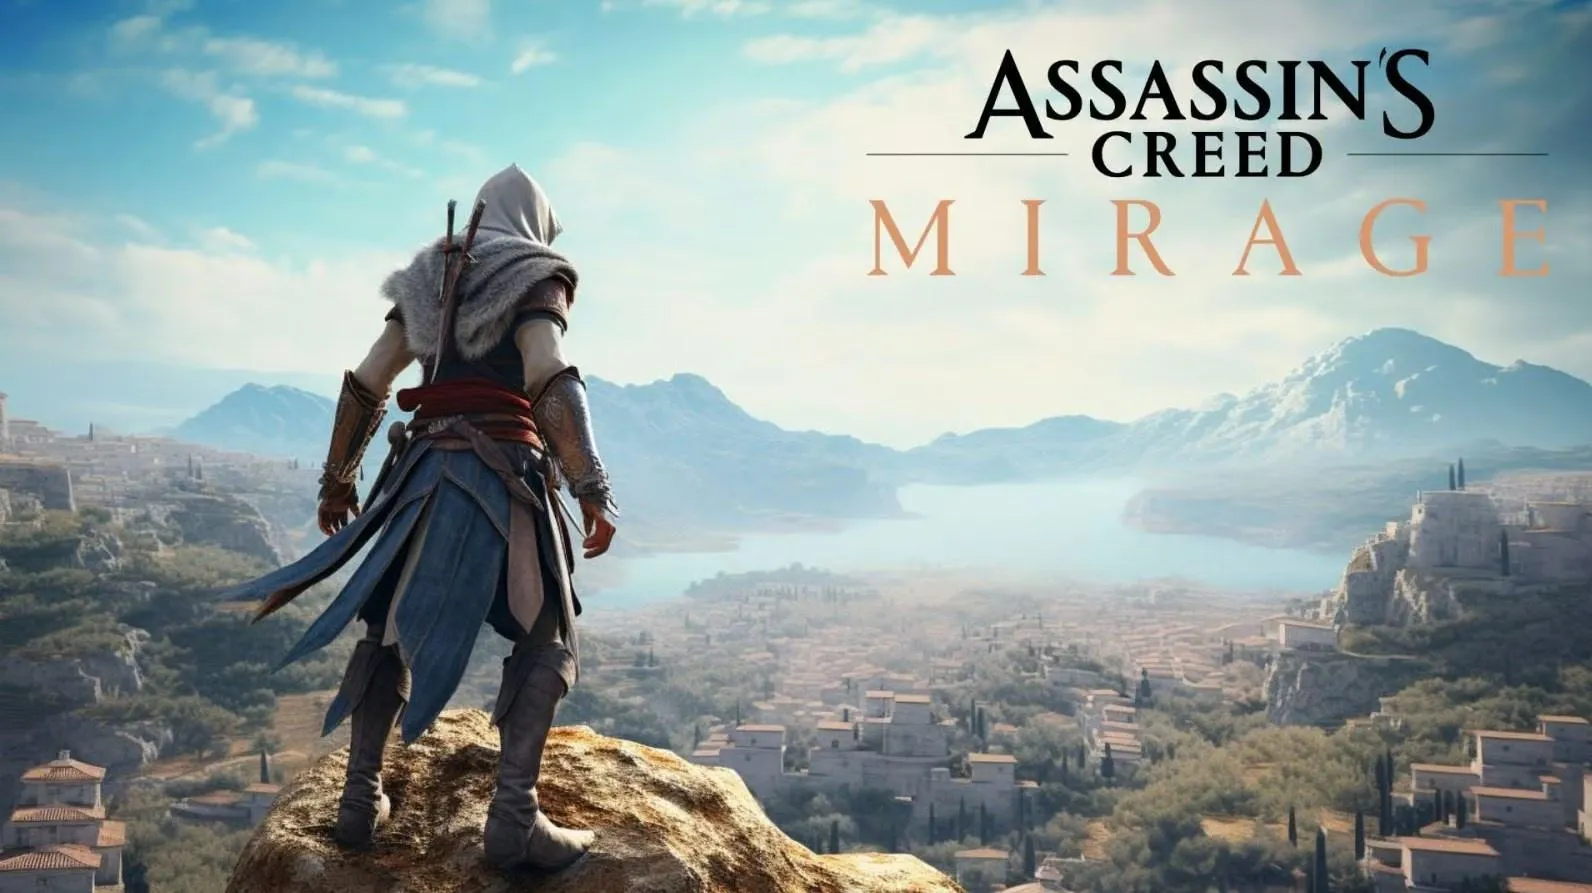 Buy Assassin's Creed® Mirage